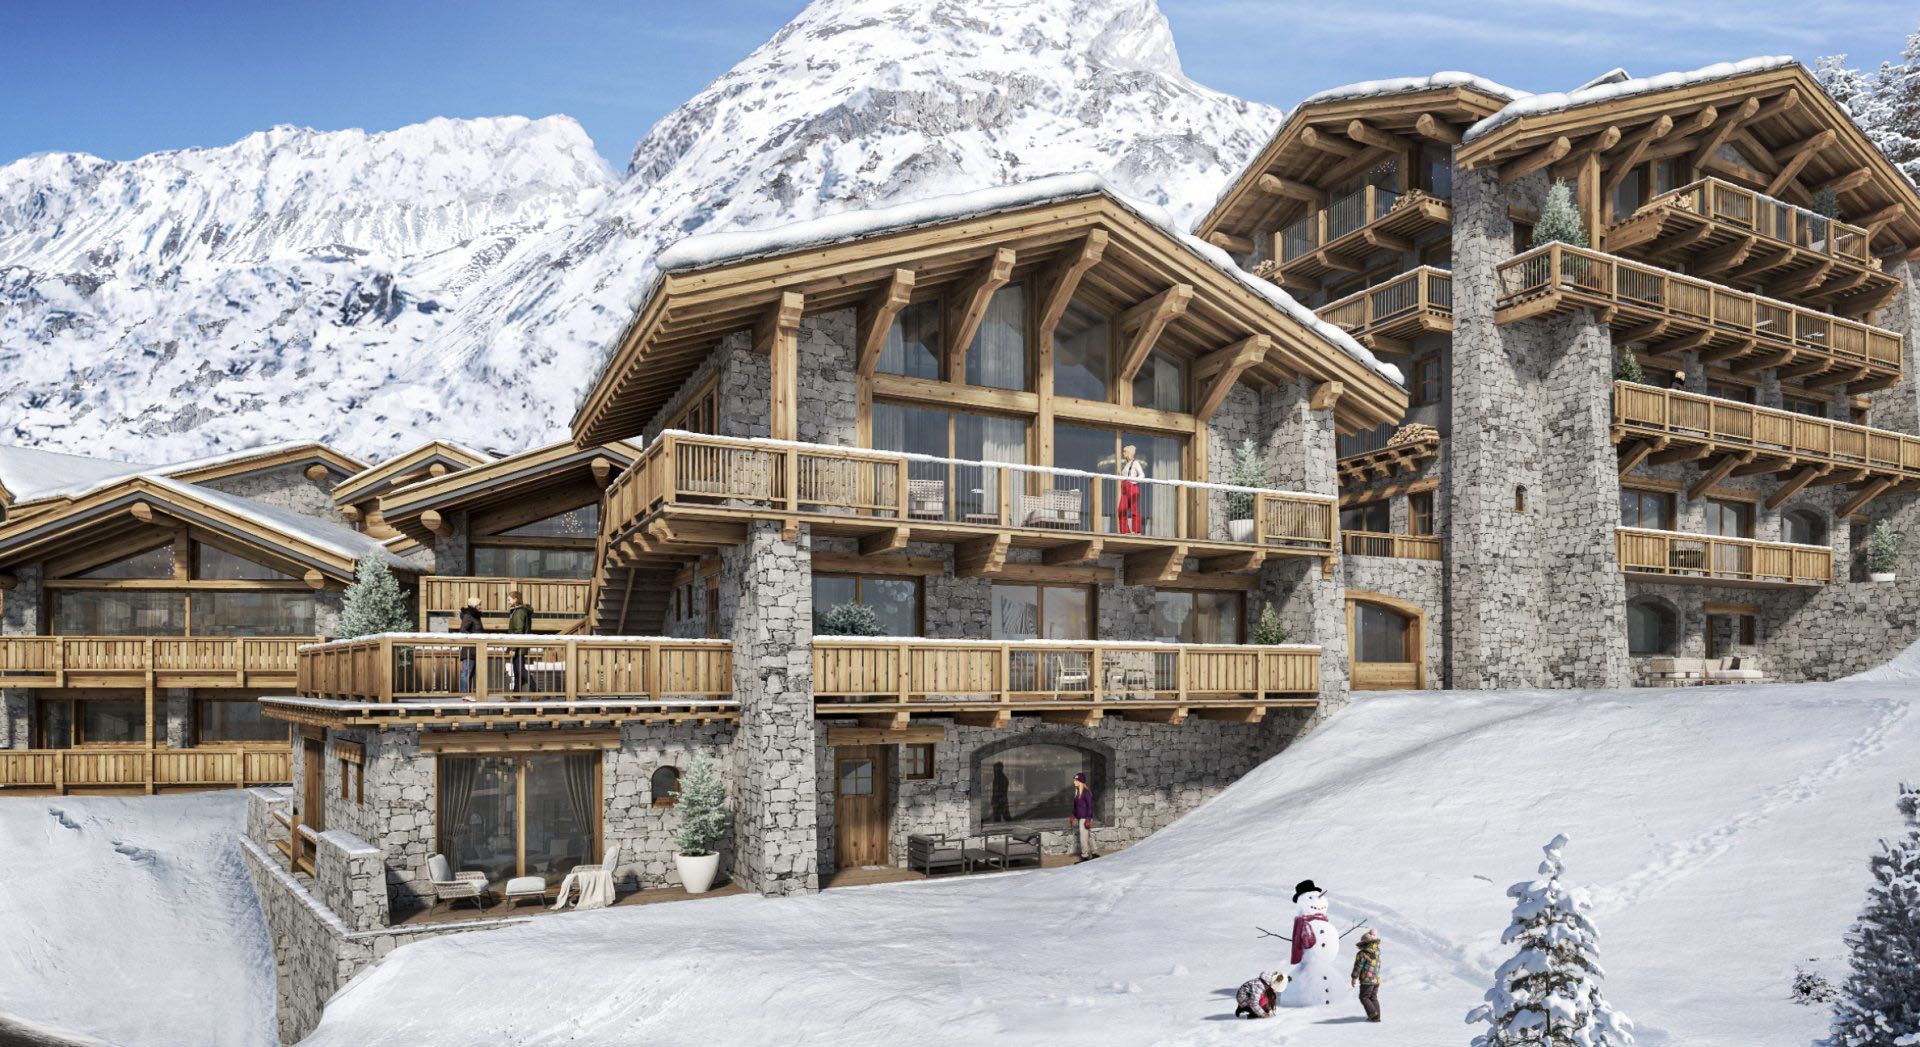 3 bed Apartment For Sale in Espace Killy, French Alps